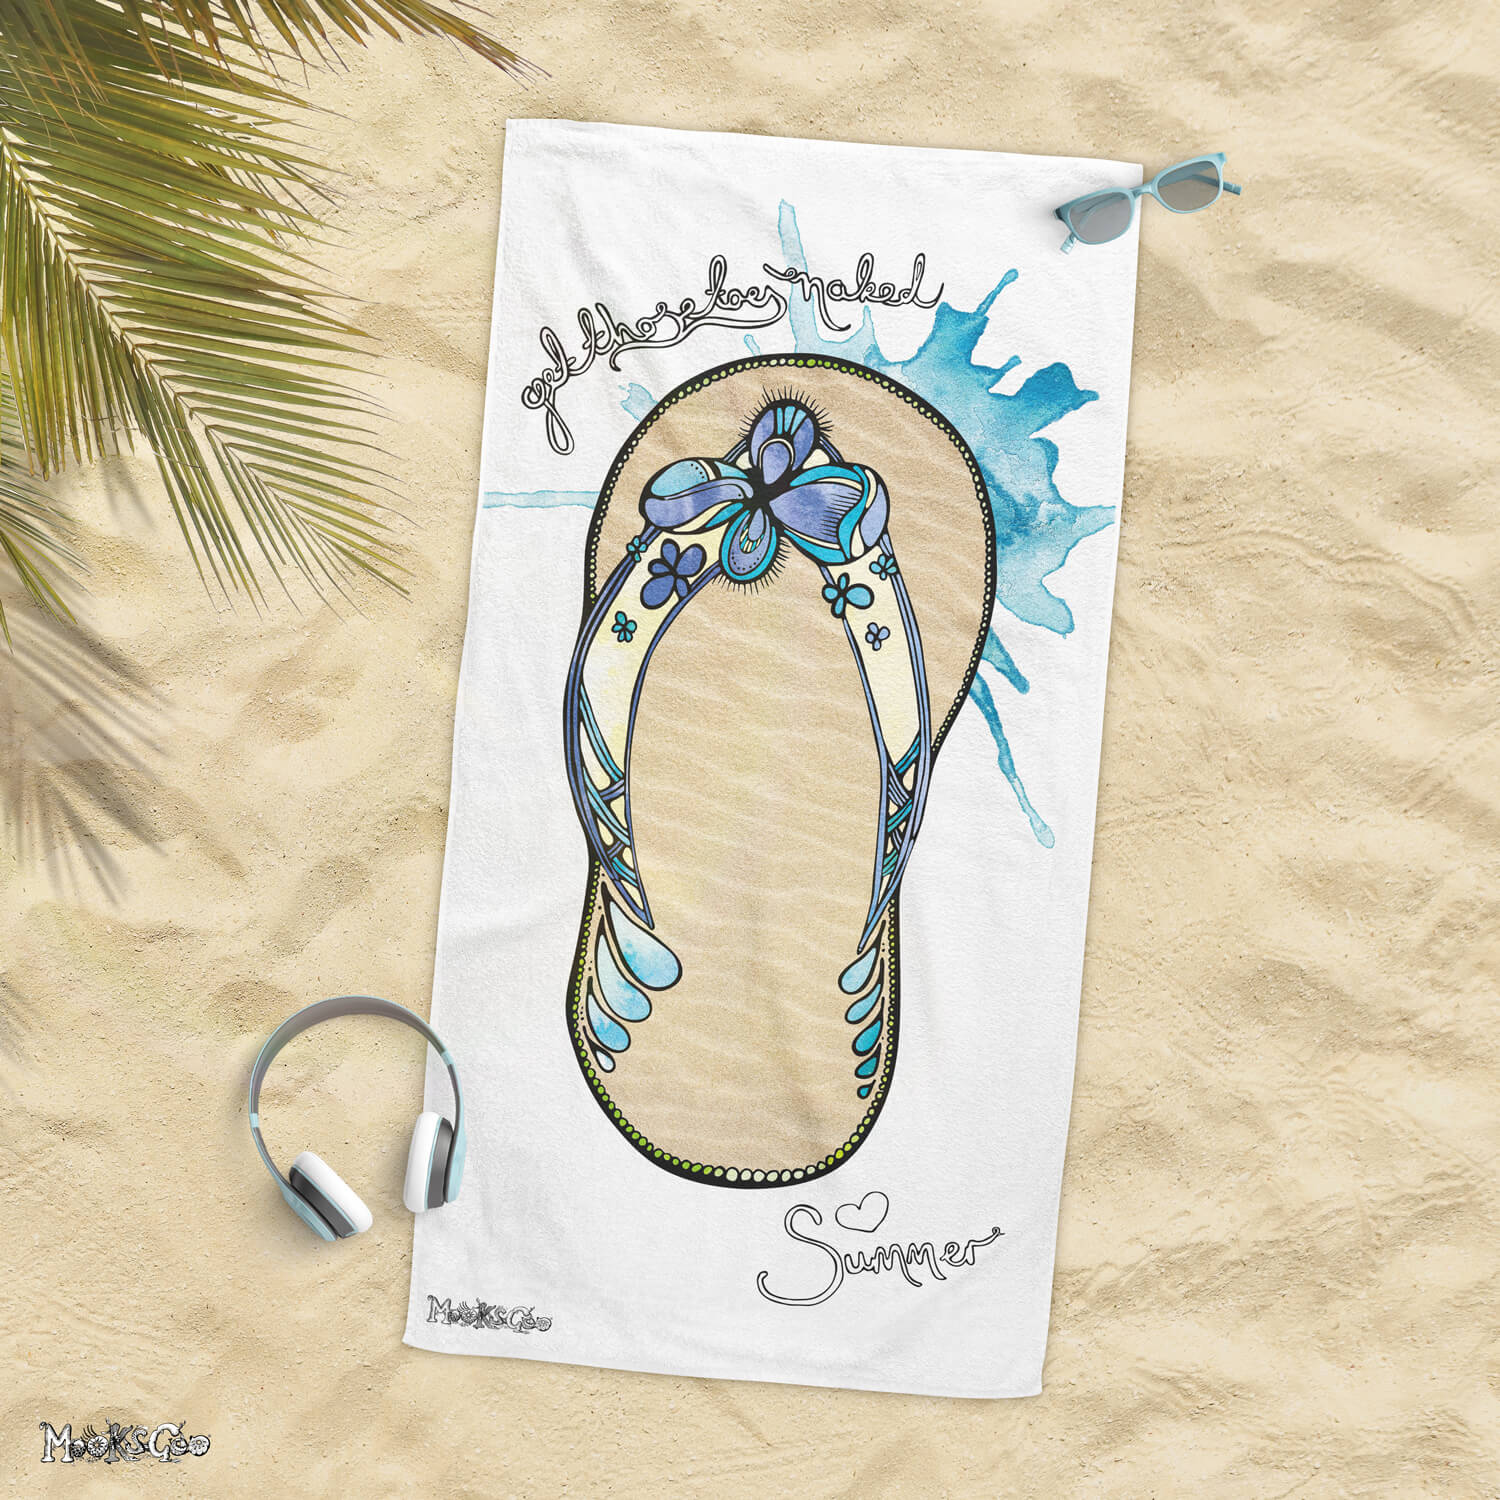 Funky flip flop illustrated towel lying on a palm beach with sunglasses and headphones, designed by MooksGoo